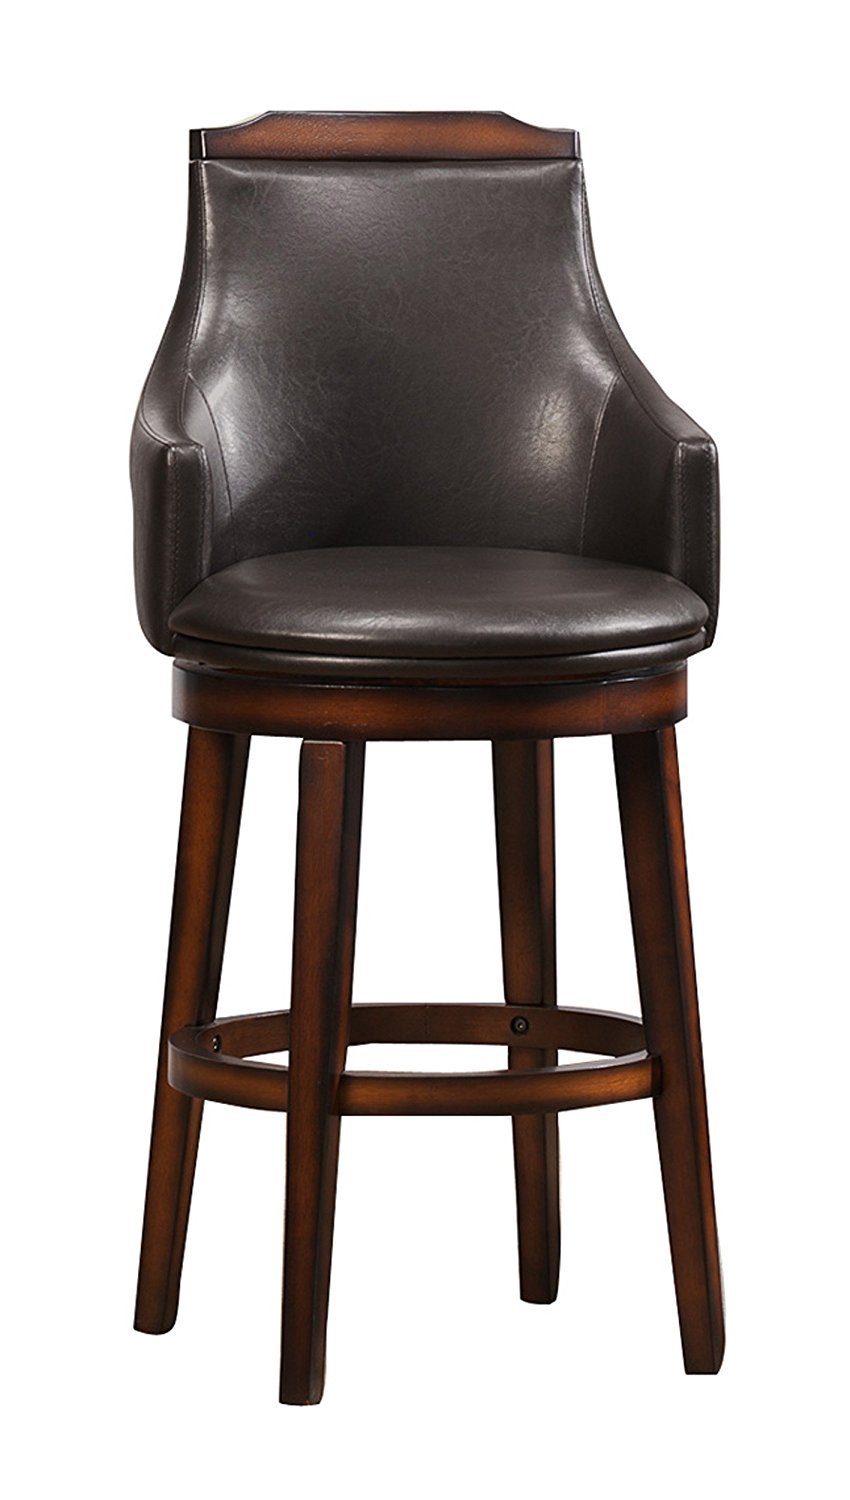 Wood & Leather Bar Height Chair With Swivel Mechanism, Oak Brown & Black, Set Of 2 - BM176301